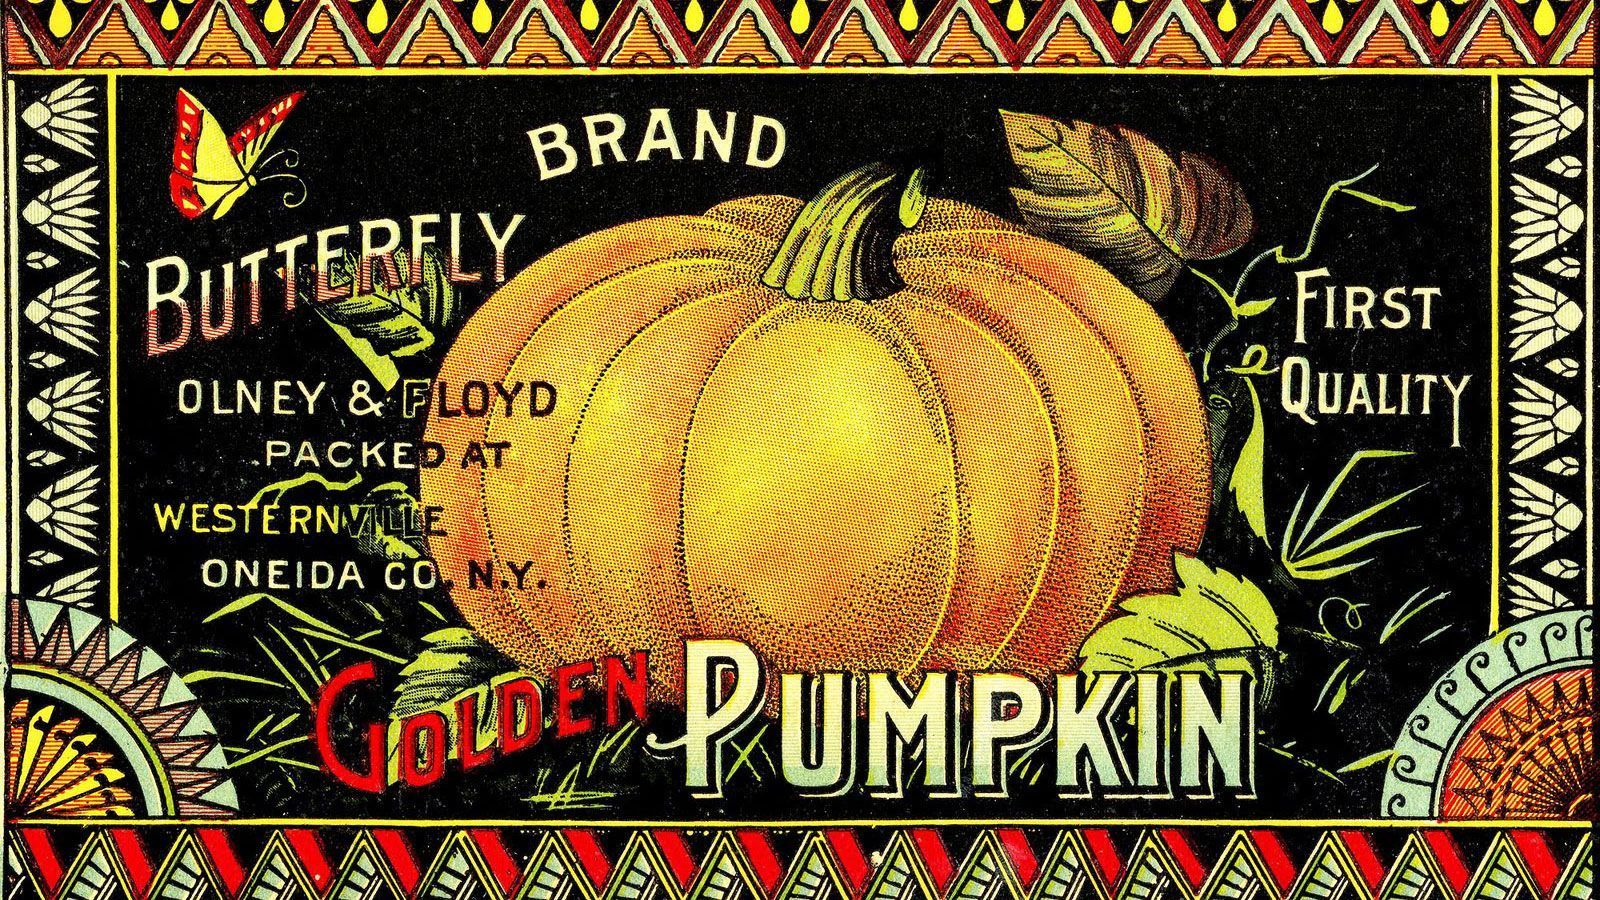 A label for a can of Butterfly Brand Golden Pumpkin. - Creepy, spooky